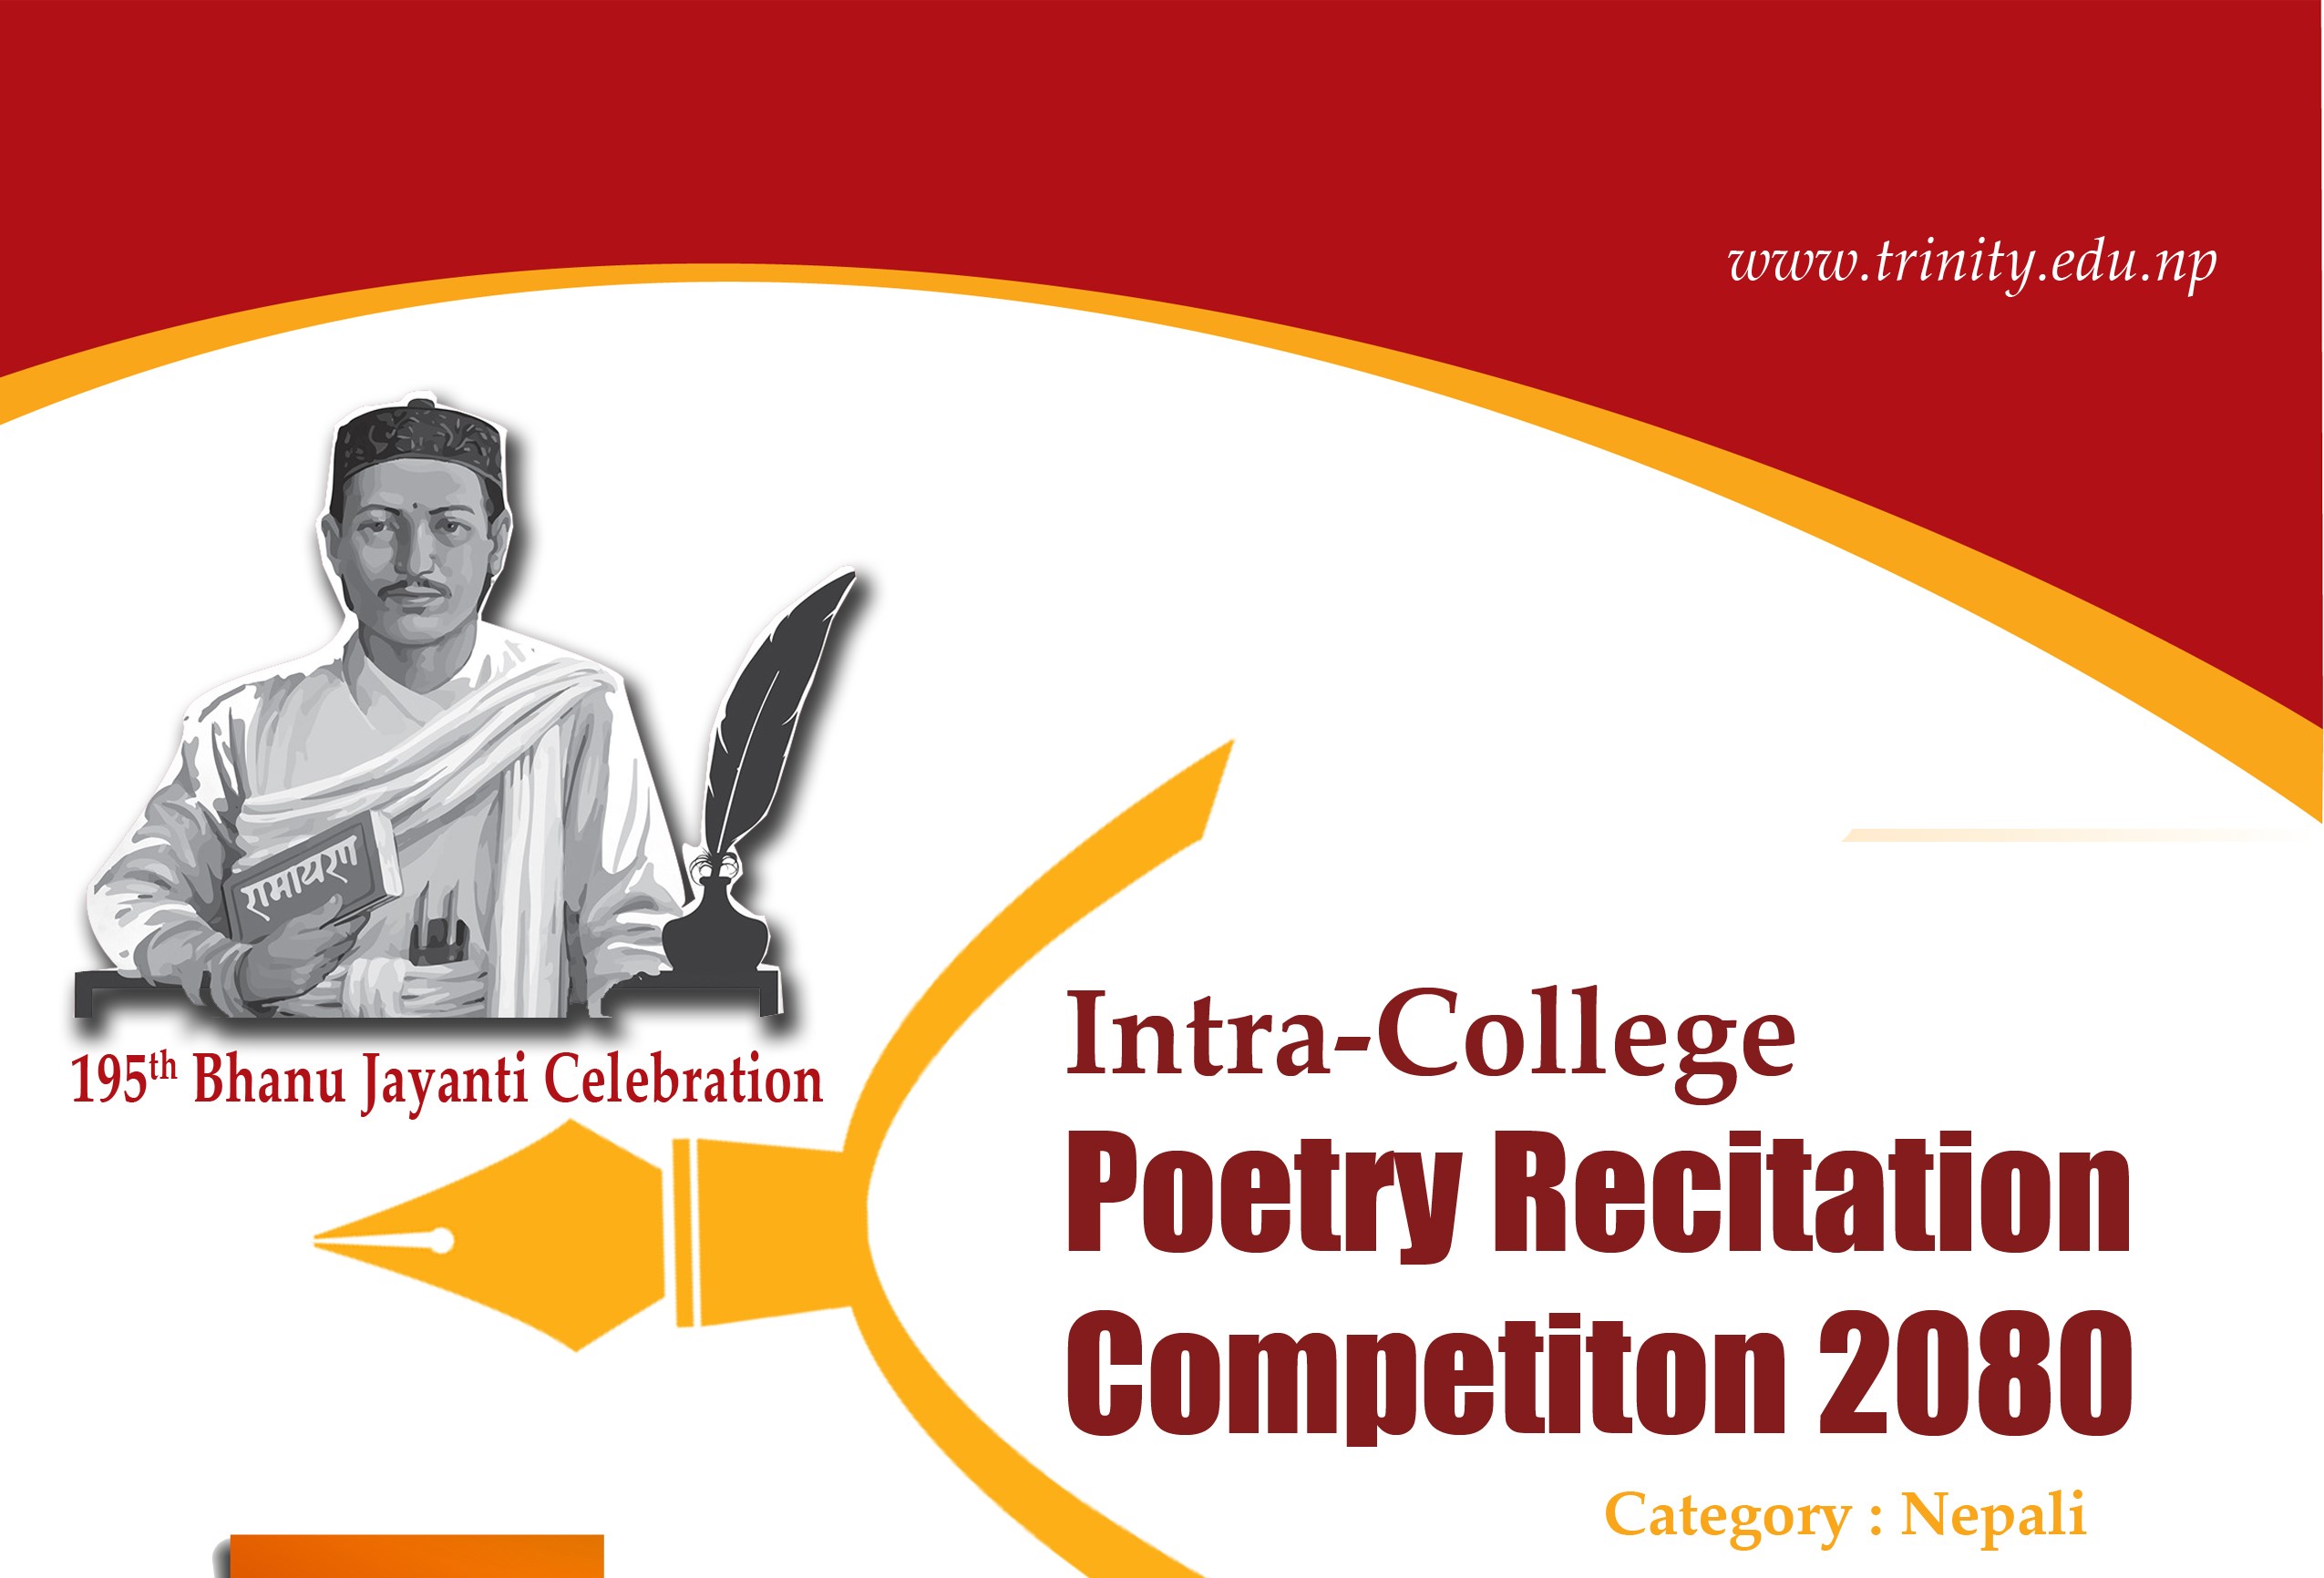 Intra-College Poetry Recitation Competition 2080